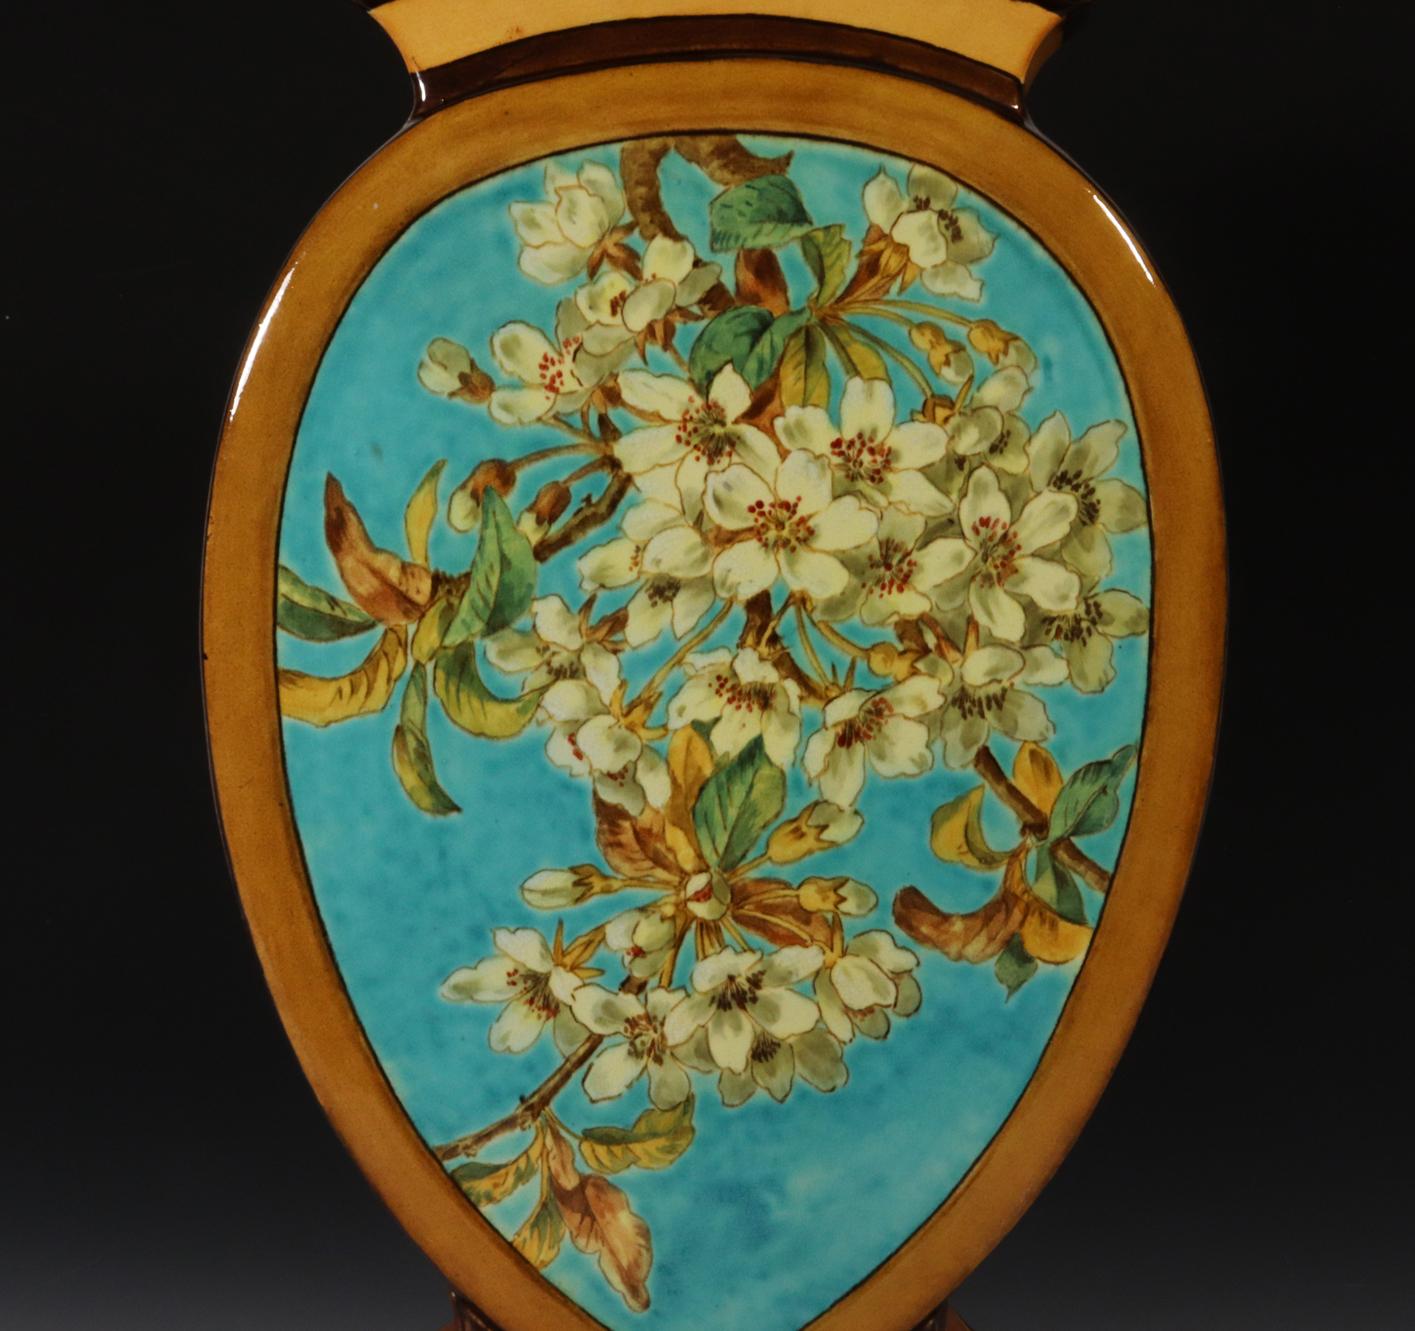 Doulton Faience Shaped Botanical Pottery Vase Signed by Artist Mary M Arding For Sale 1